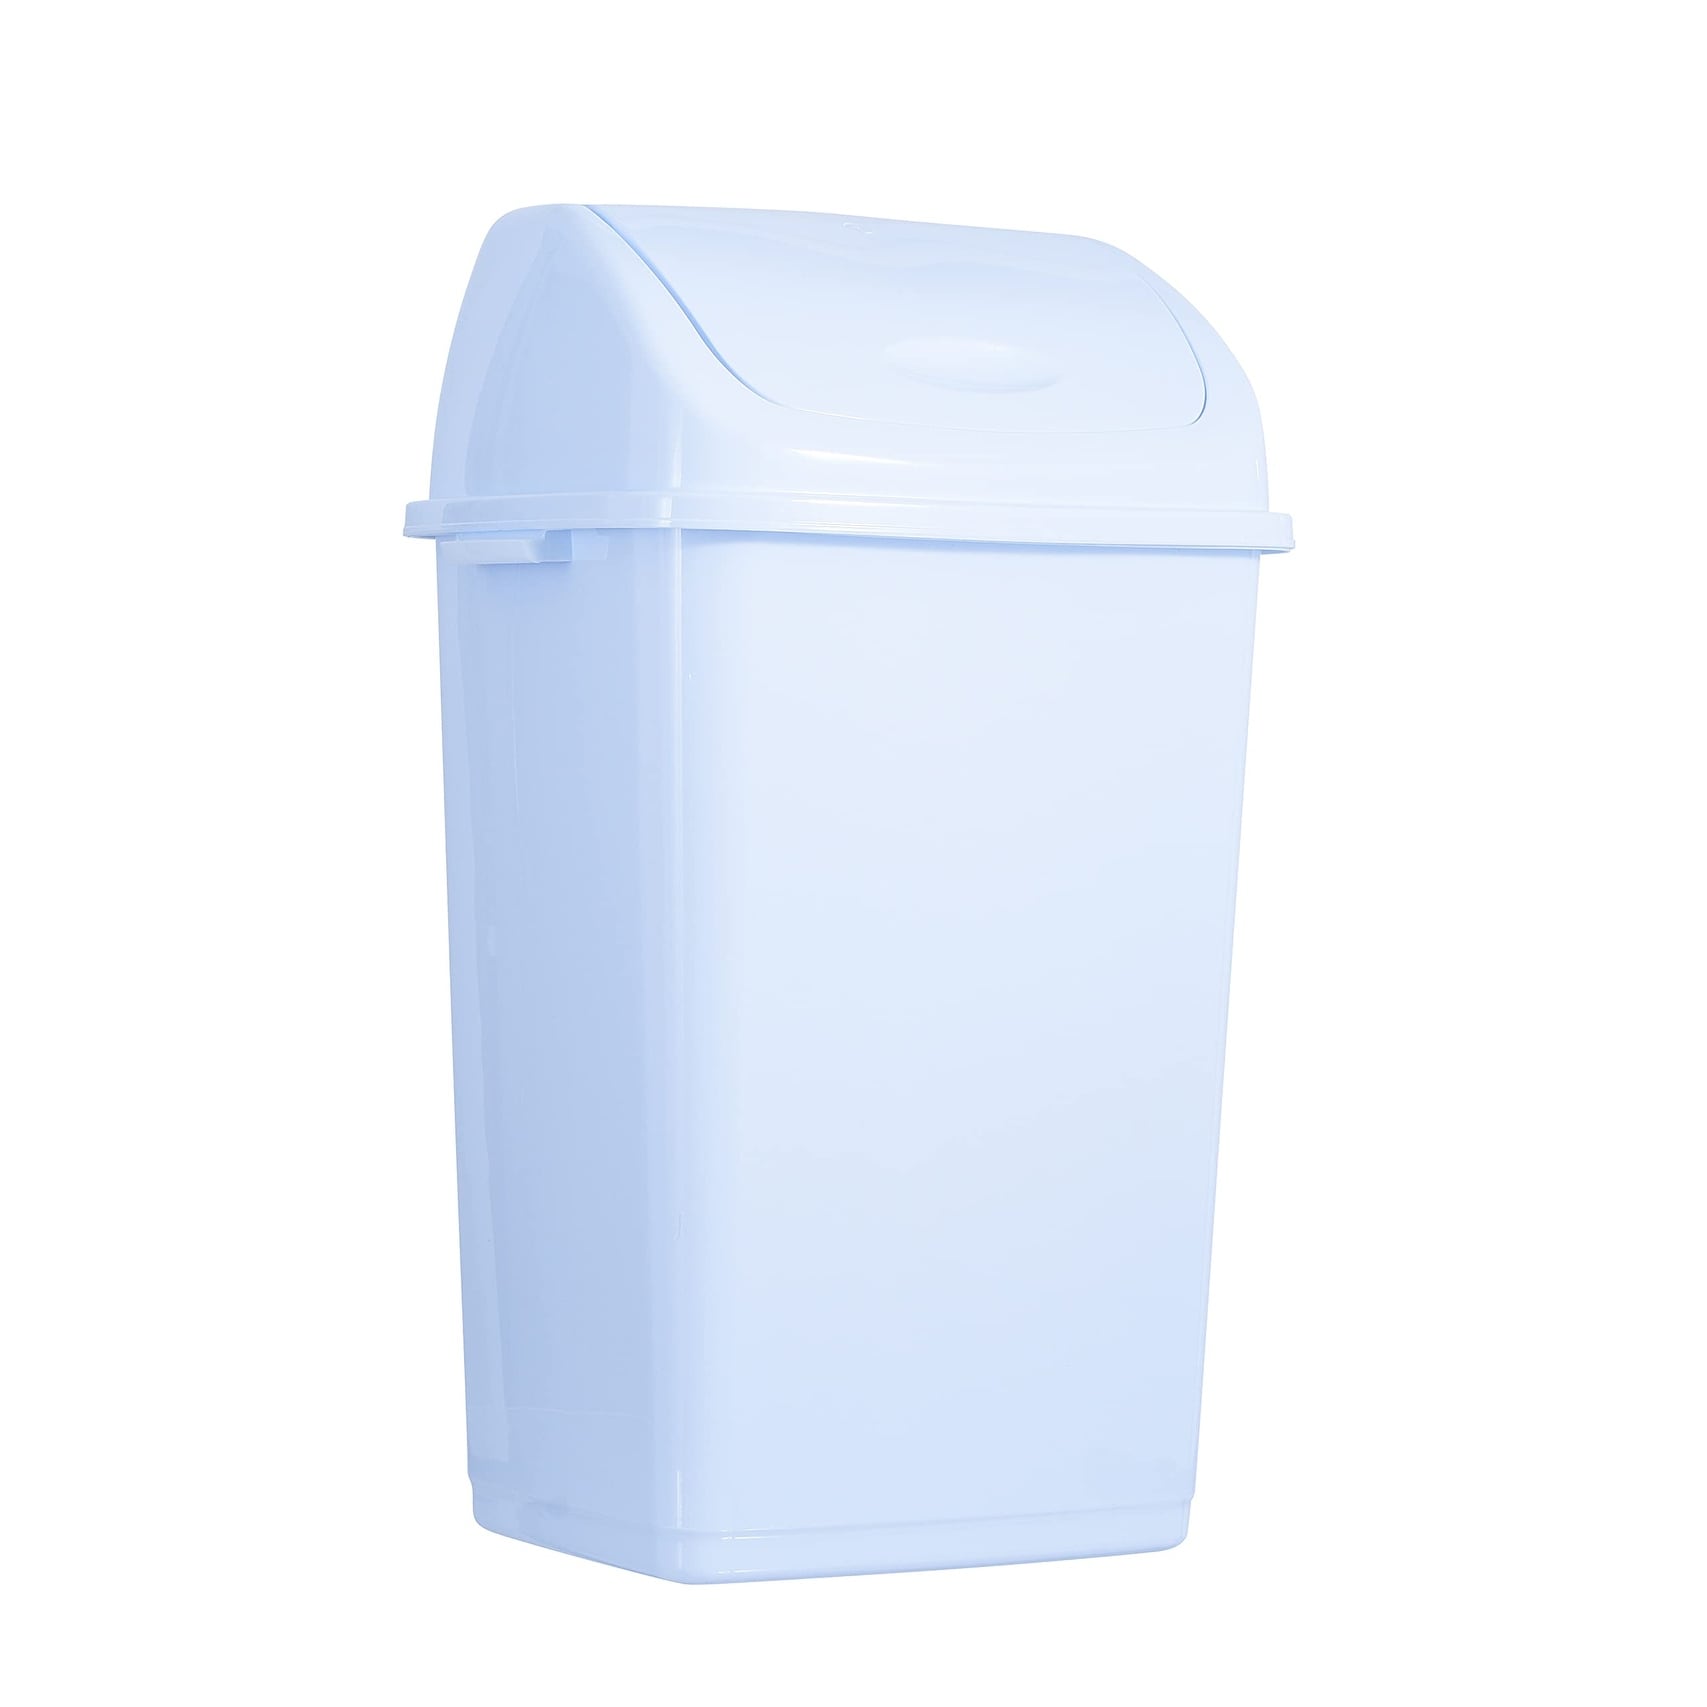 https://ak1.ostkcdn.com/images/products/is/images/direct/46814bb21a944af68e63969827384d1f7f69201a/13-gal-Swing-Top-Trash-Can%2C-White.jpg